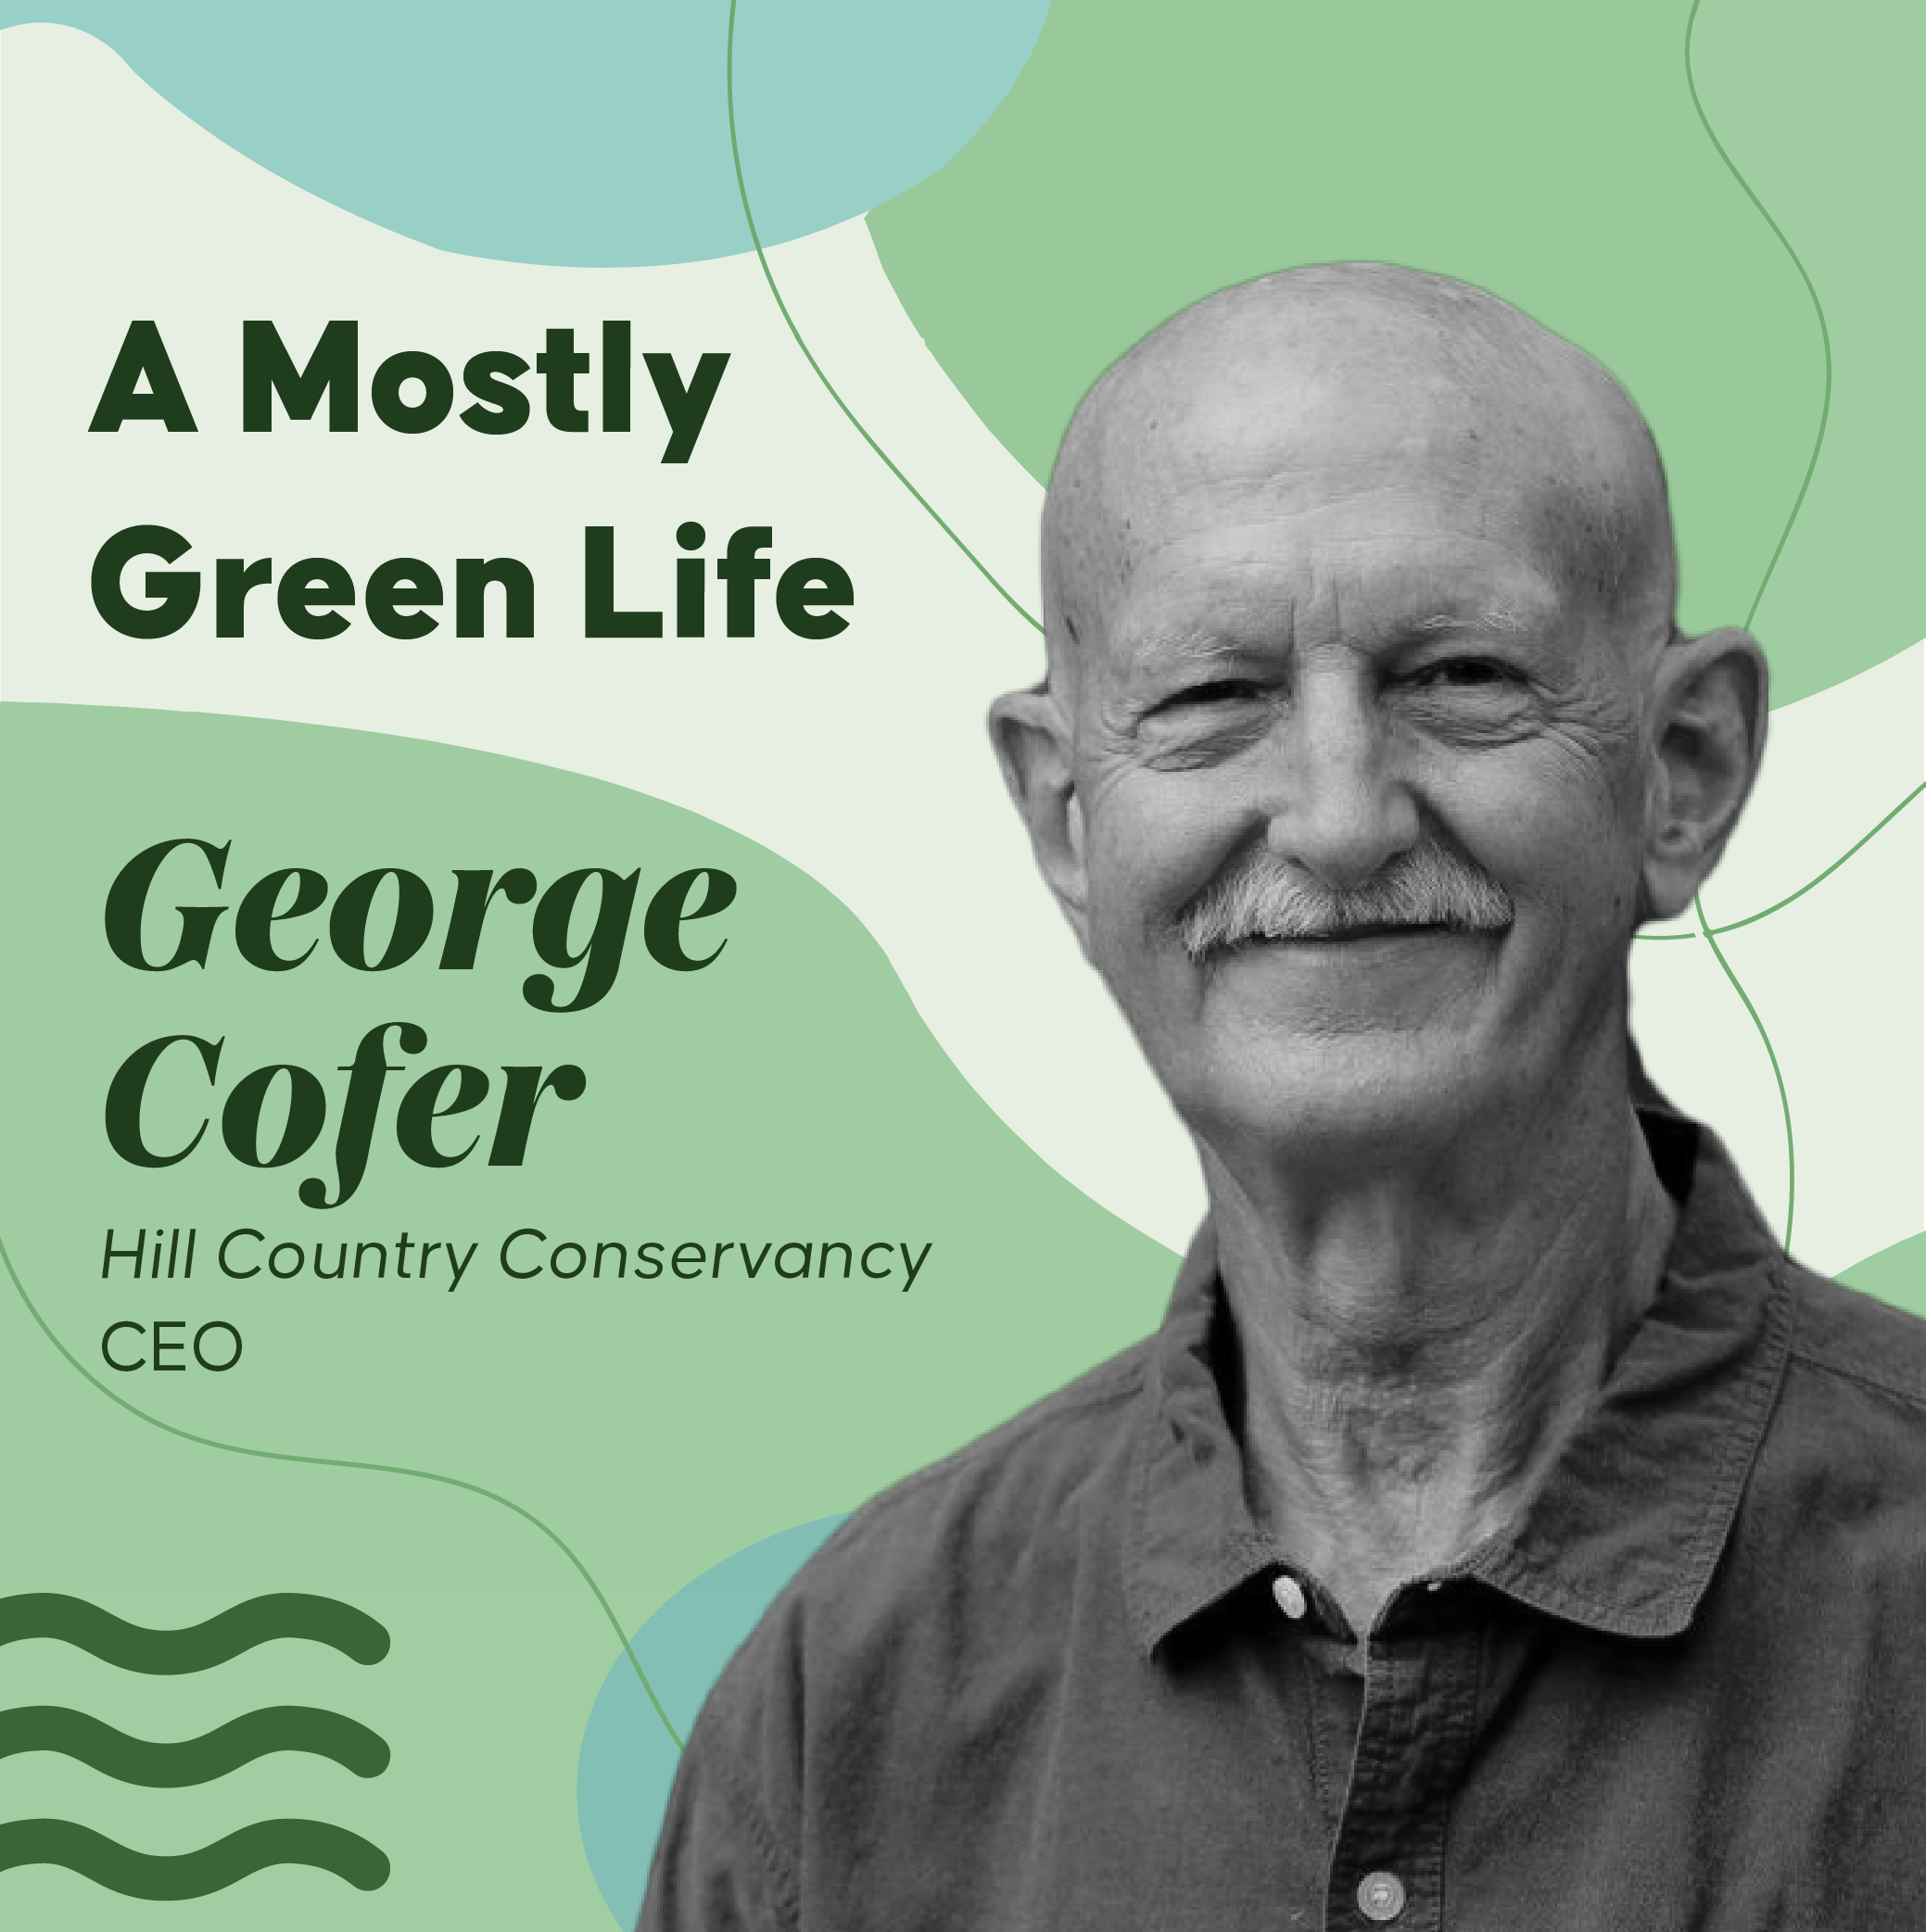 George Cofer of Hill Country Conservancy